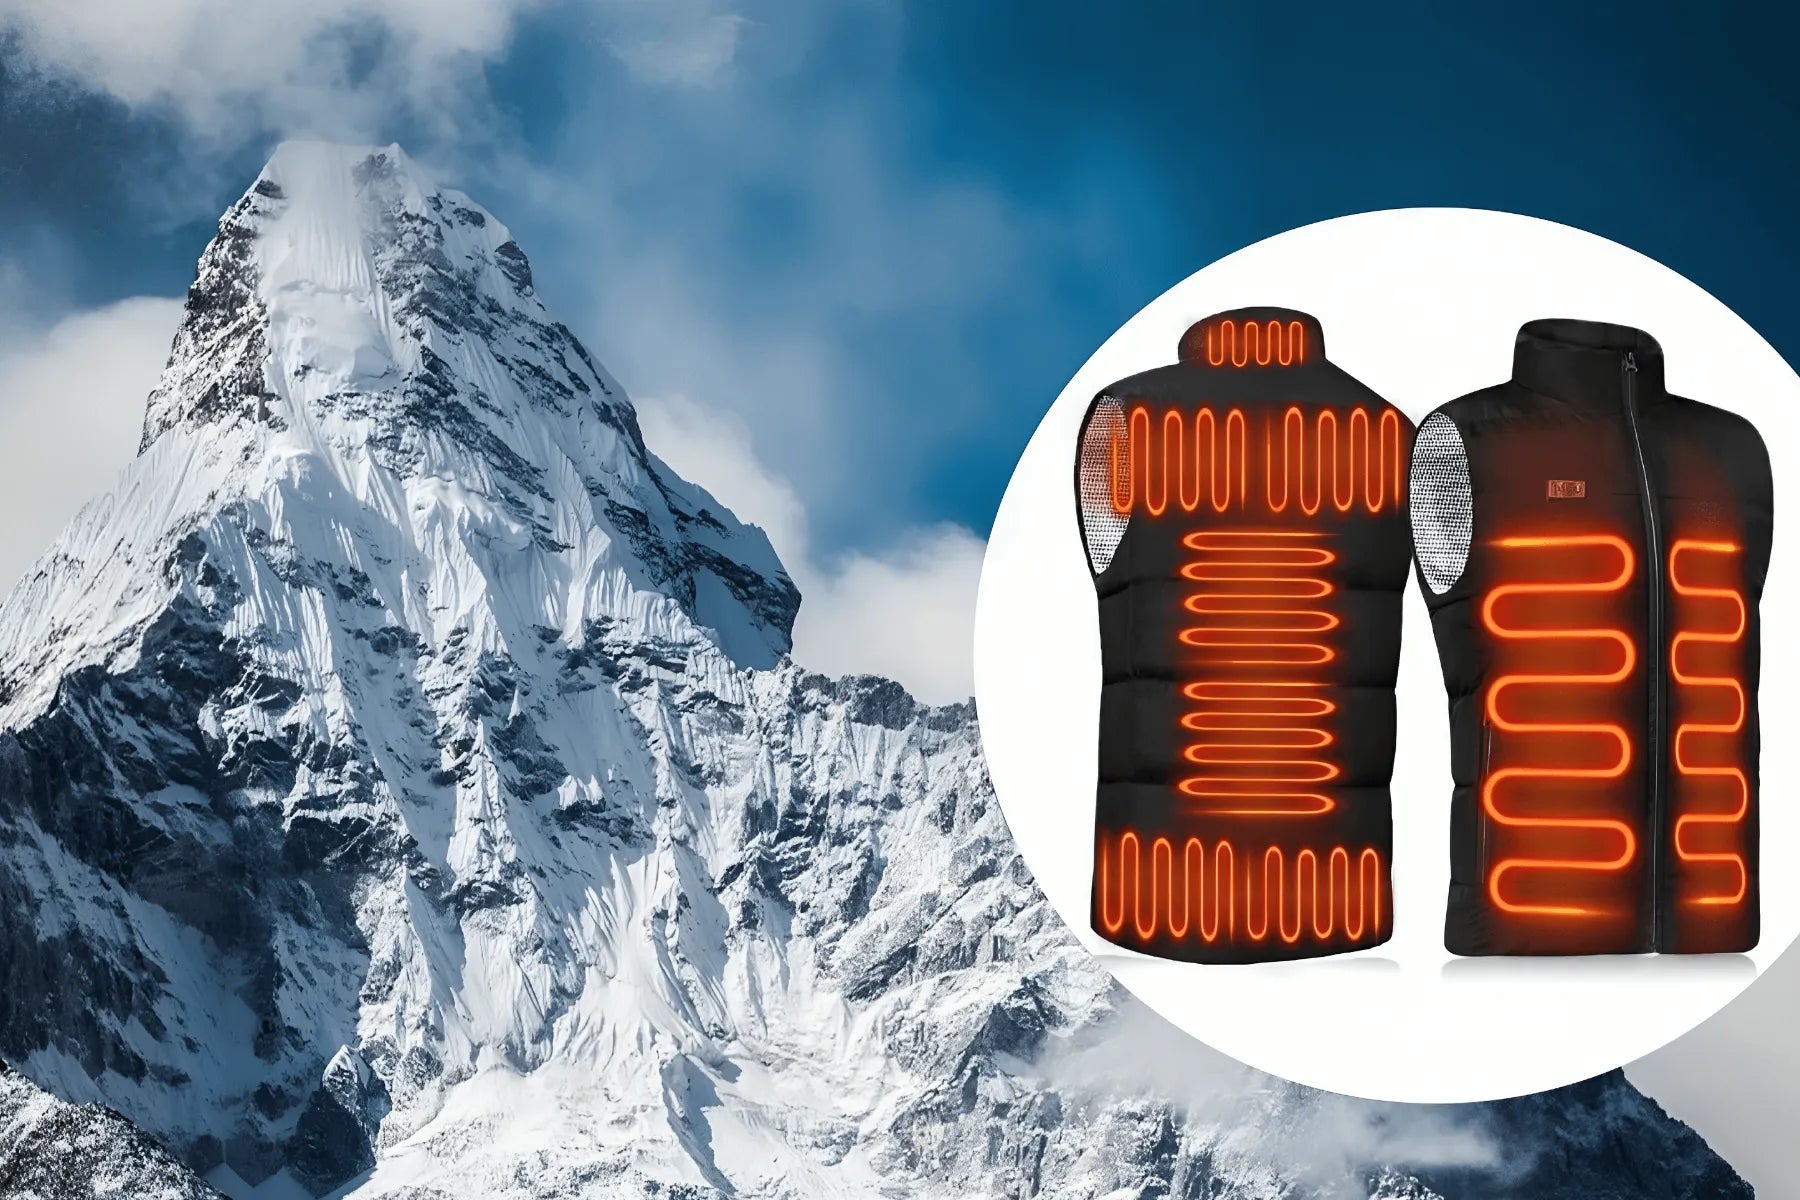 Wear heated vest to keep warm in the freezing winter